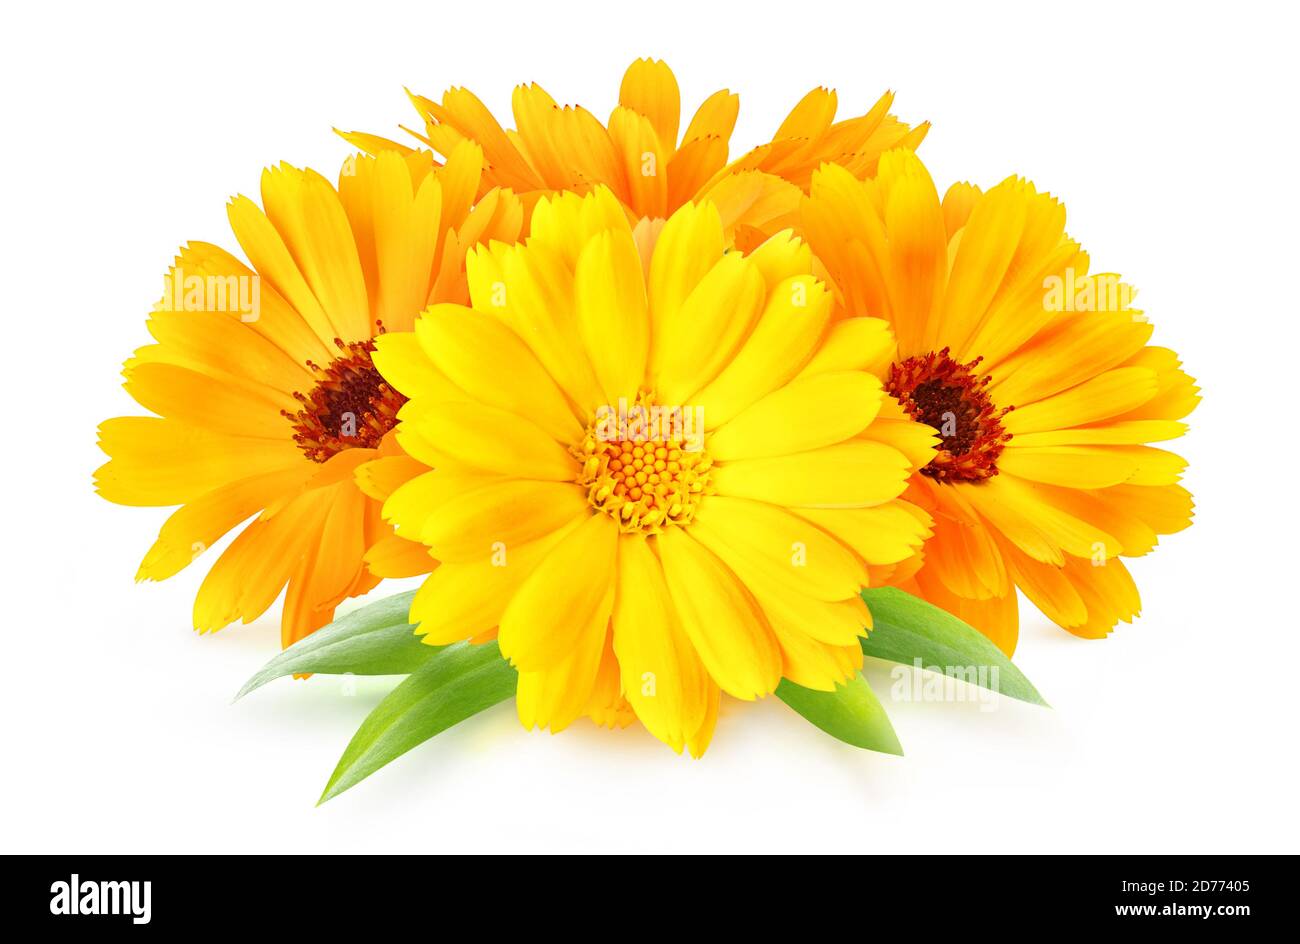 Flowers of calendula officinalis medicinal herb isolated on white background Stock Photo